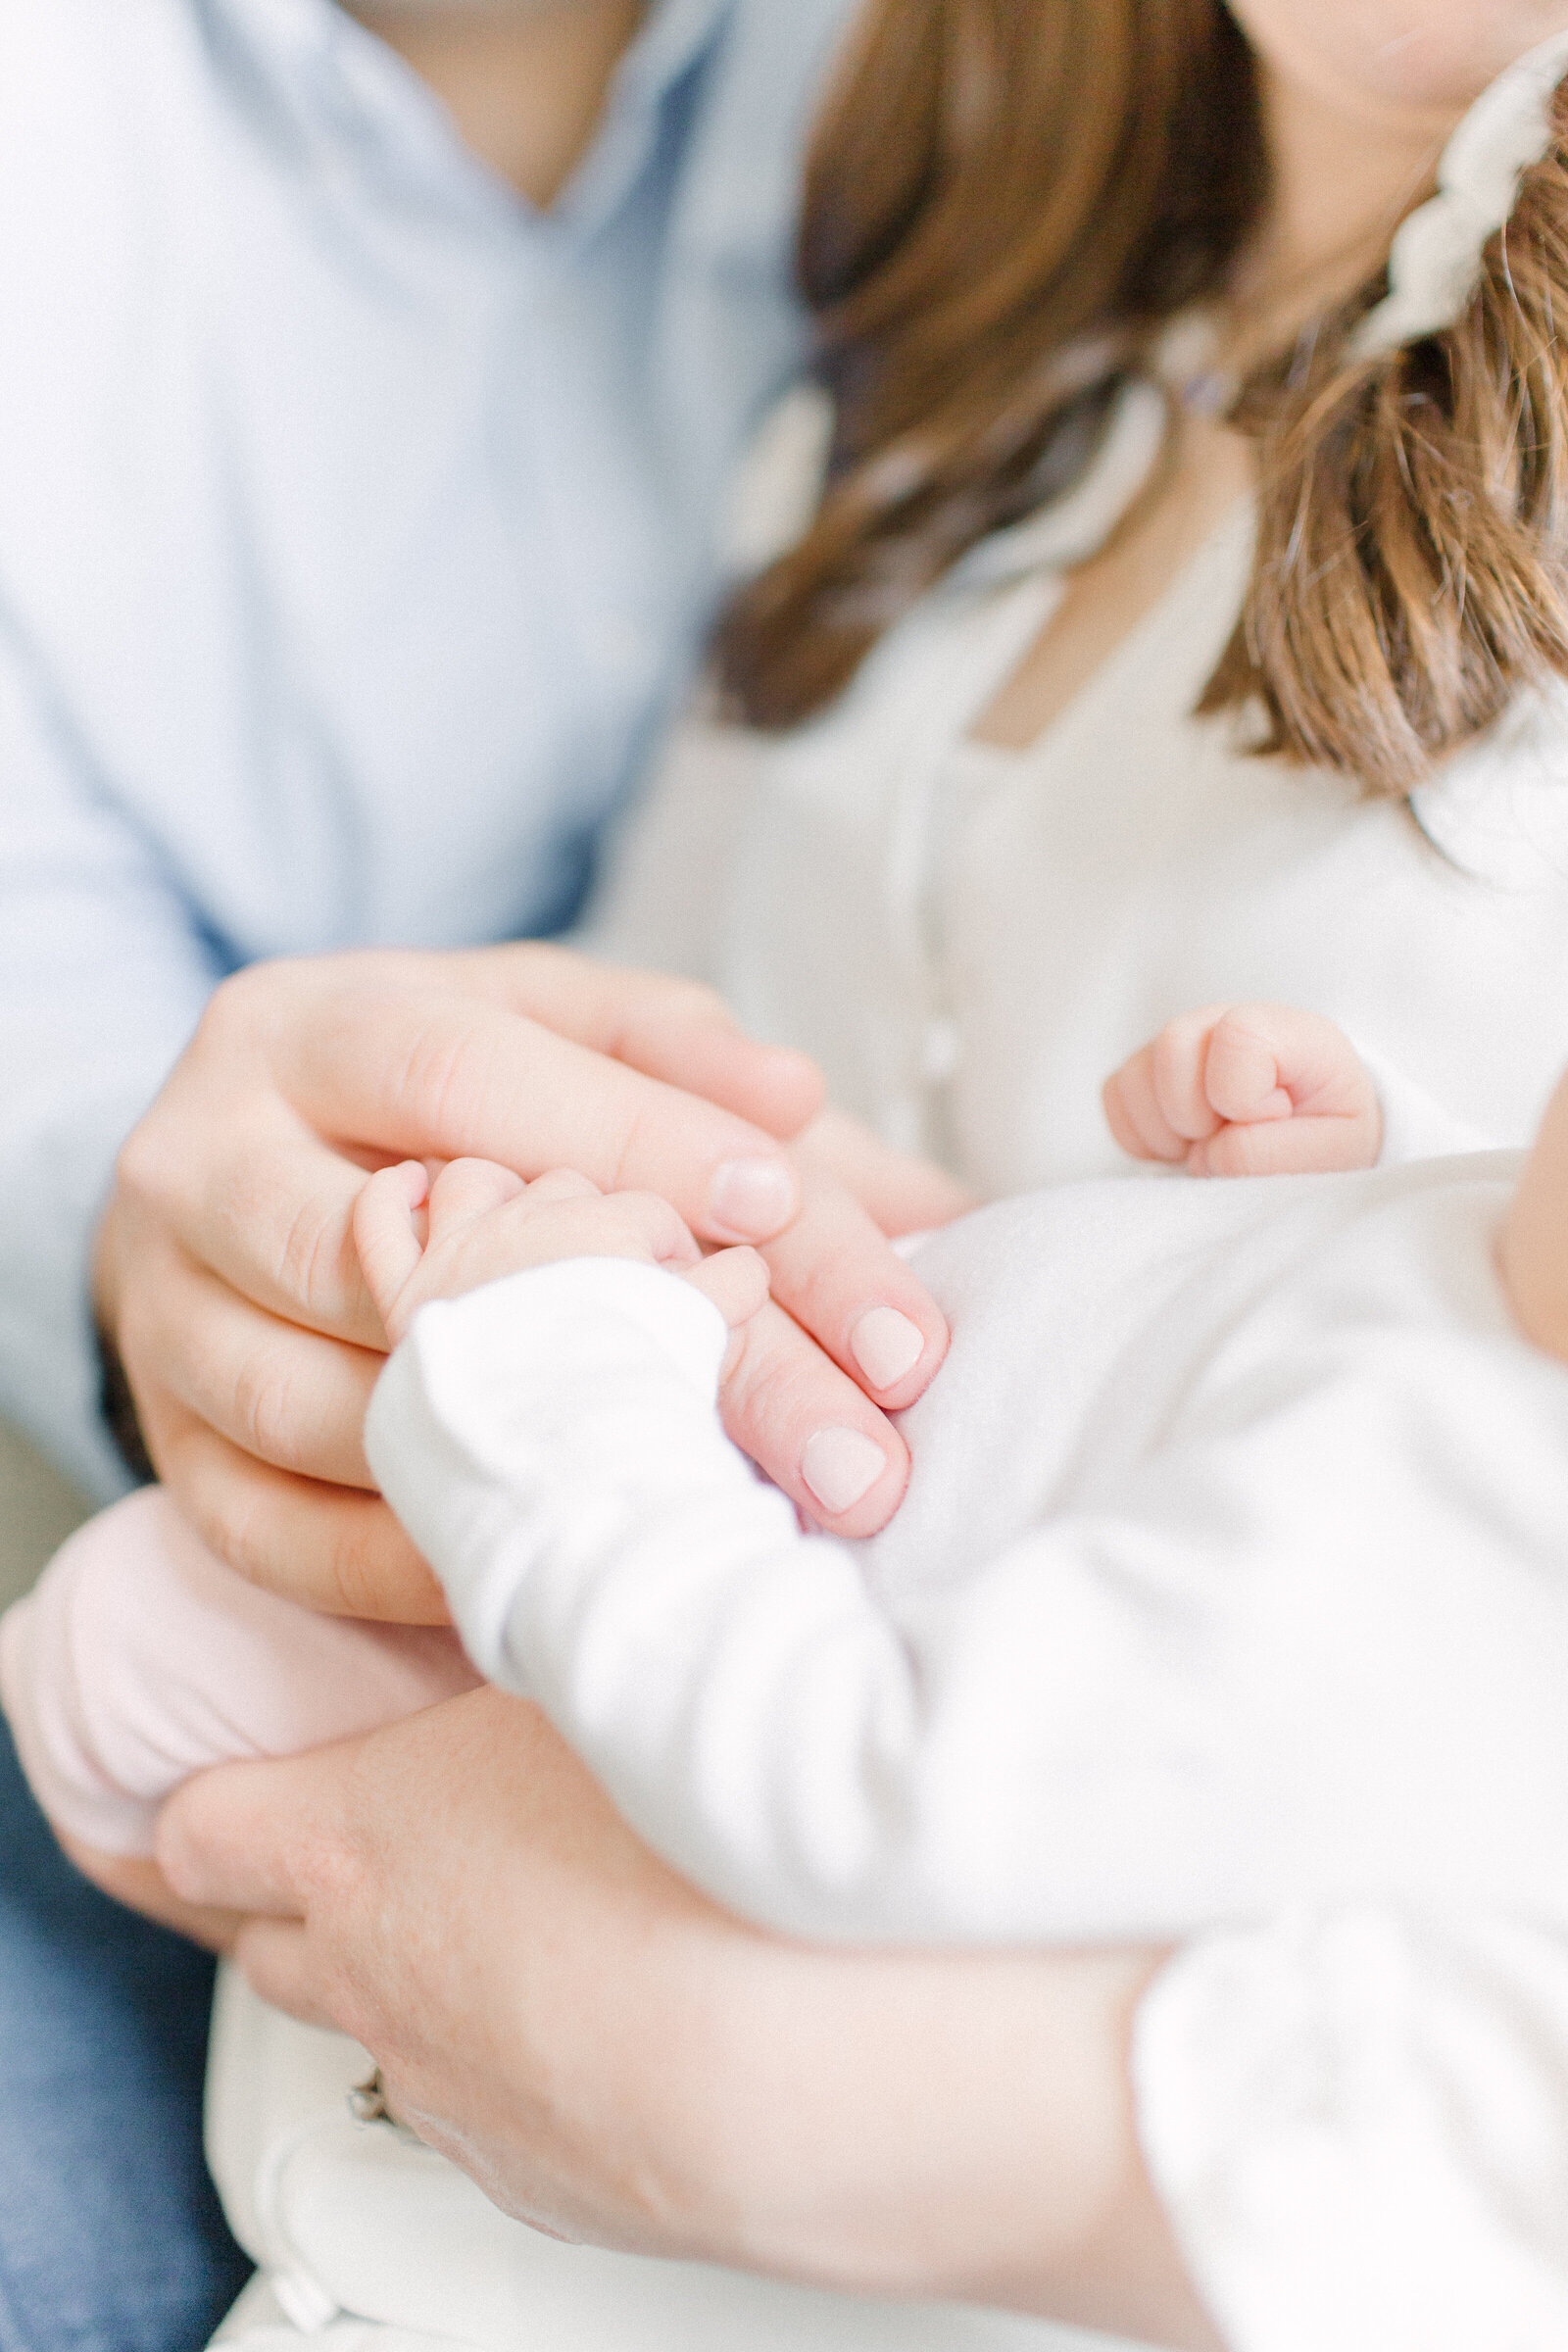 A close up photo of a newborn  baby's hand resting on her parents hands while they hold her